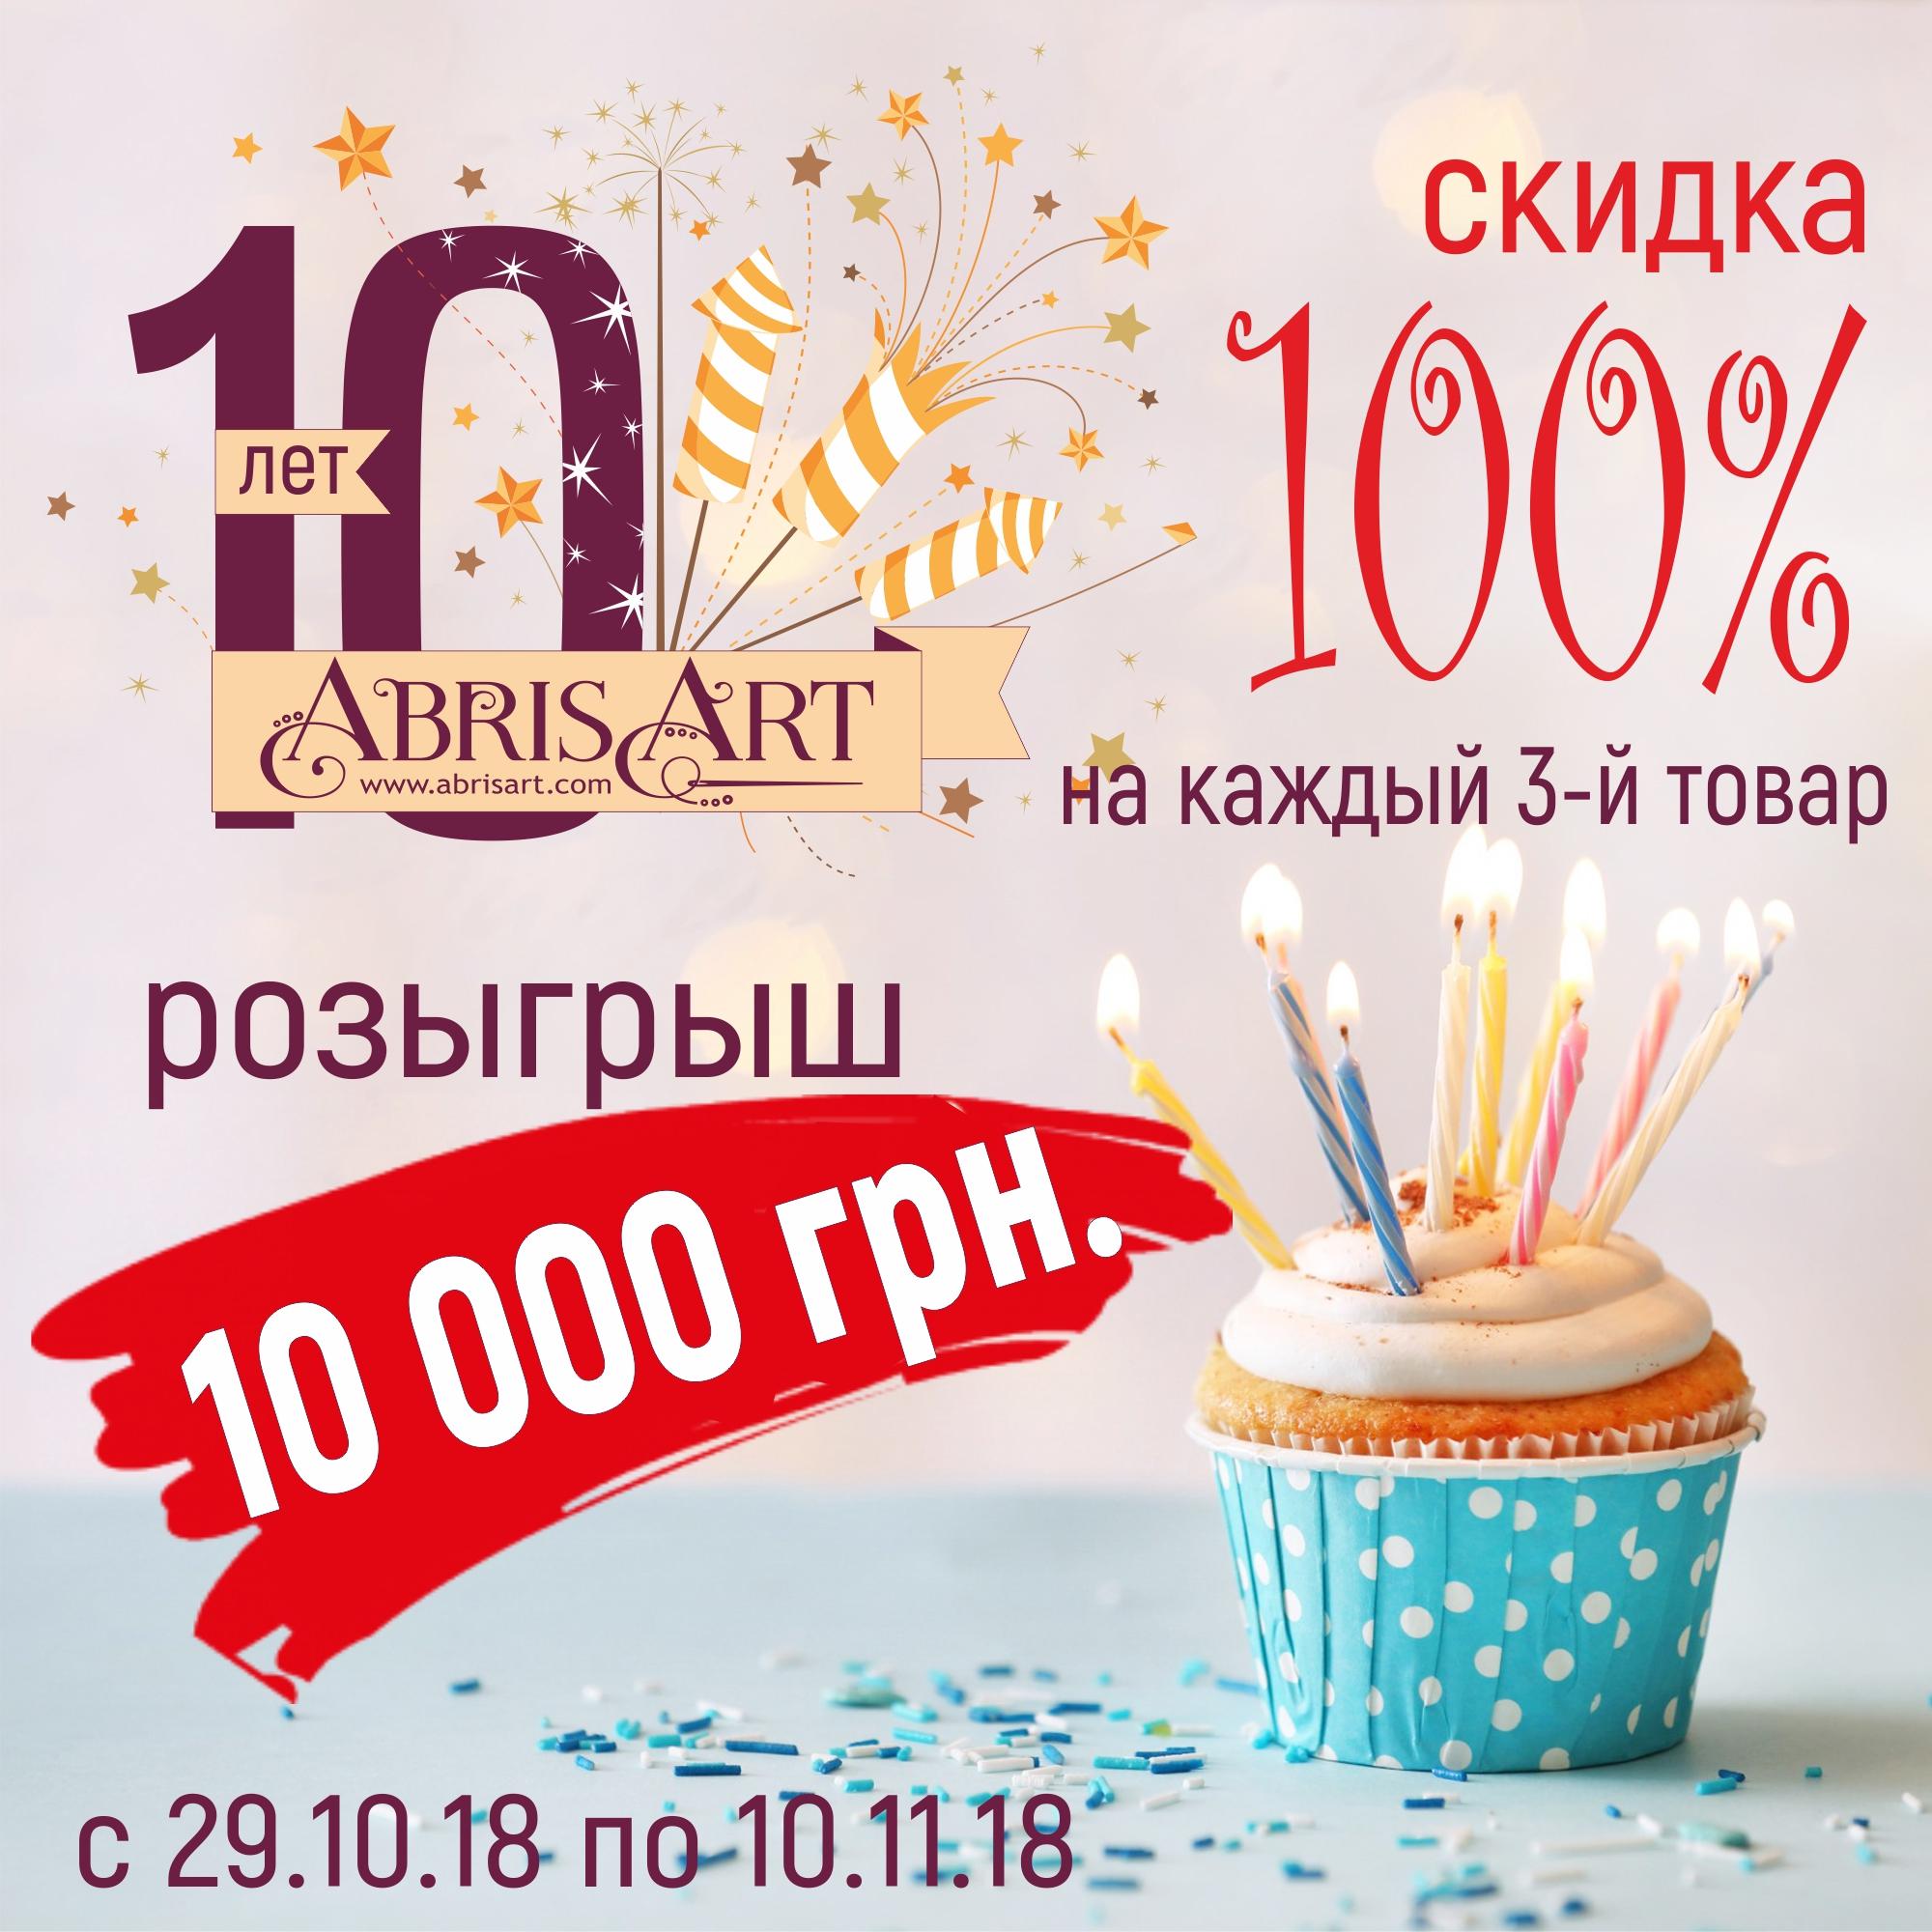  Abris Art 10 years old: playing out UAH 10,000 and giving 100% discount!